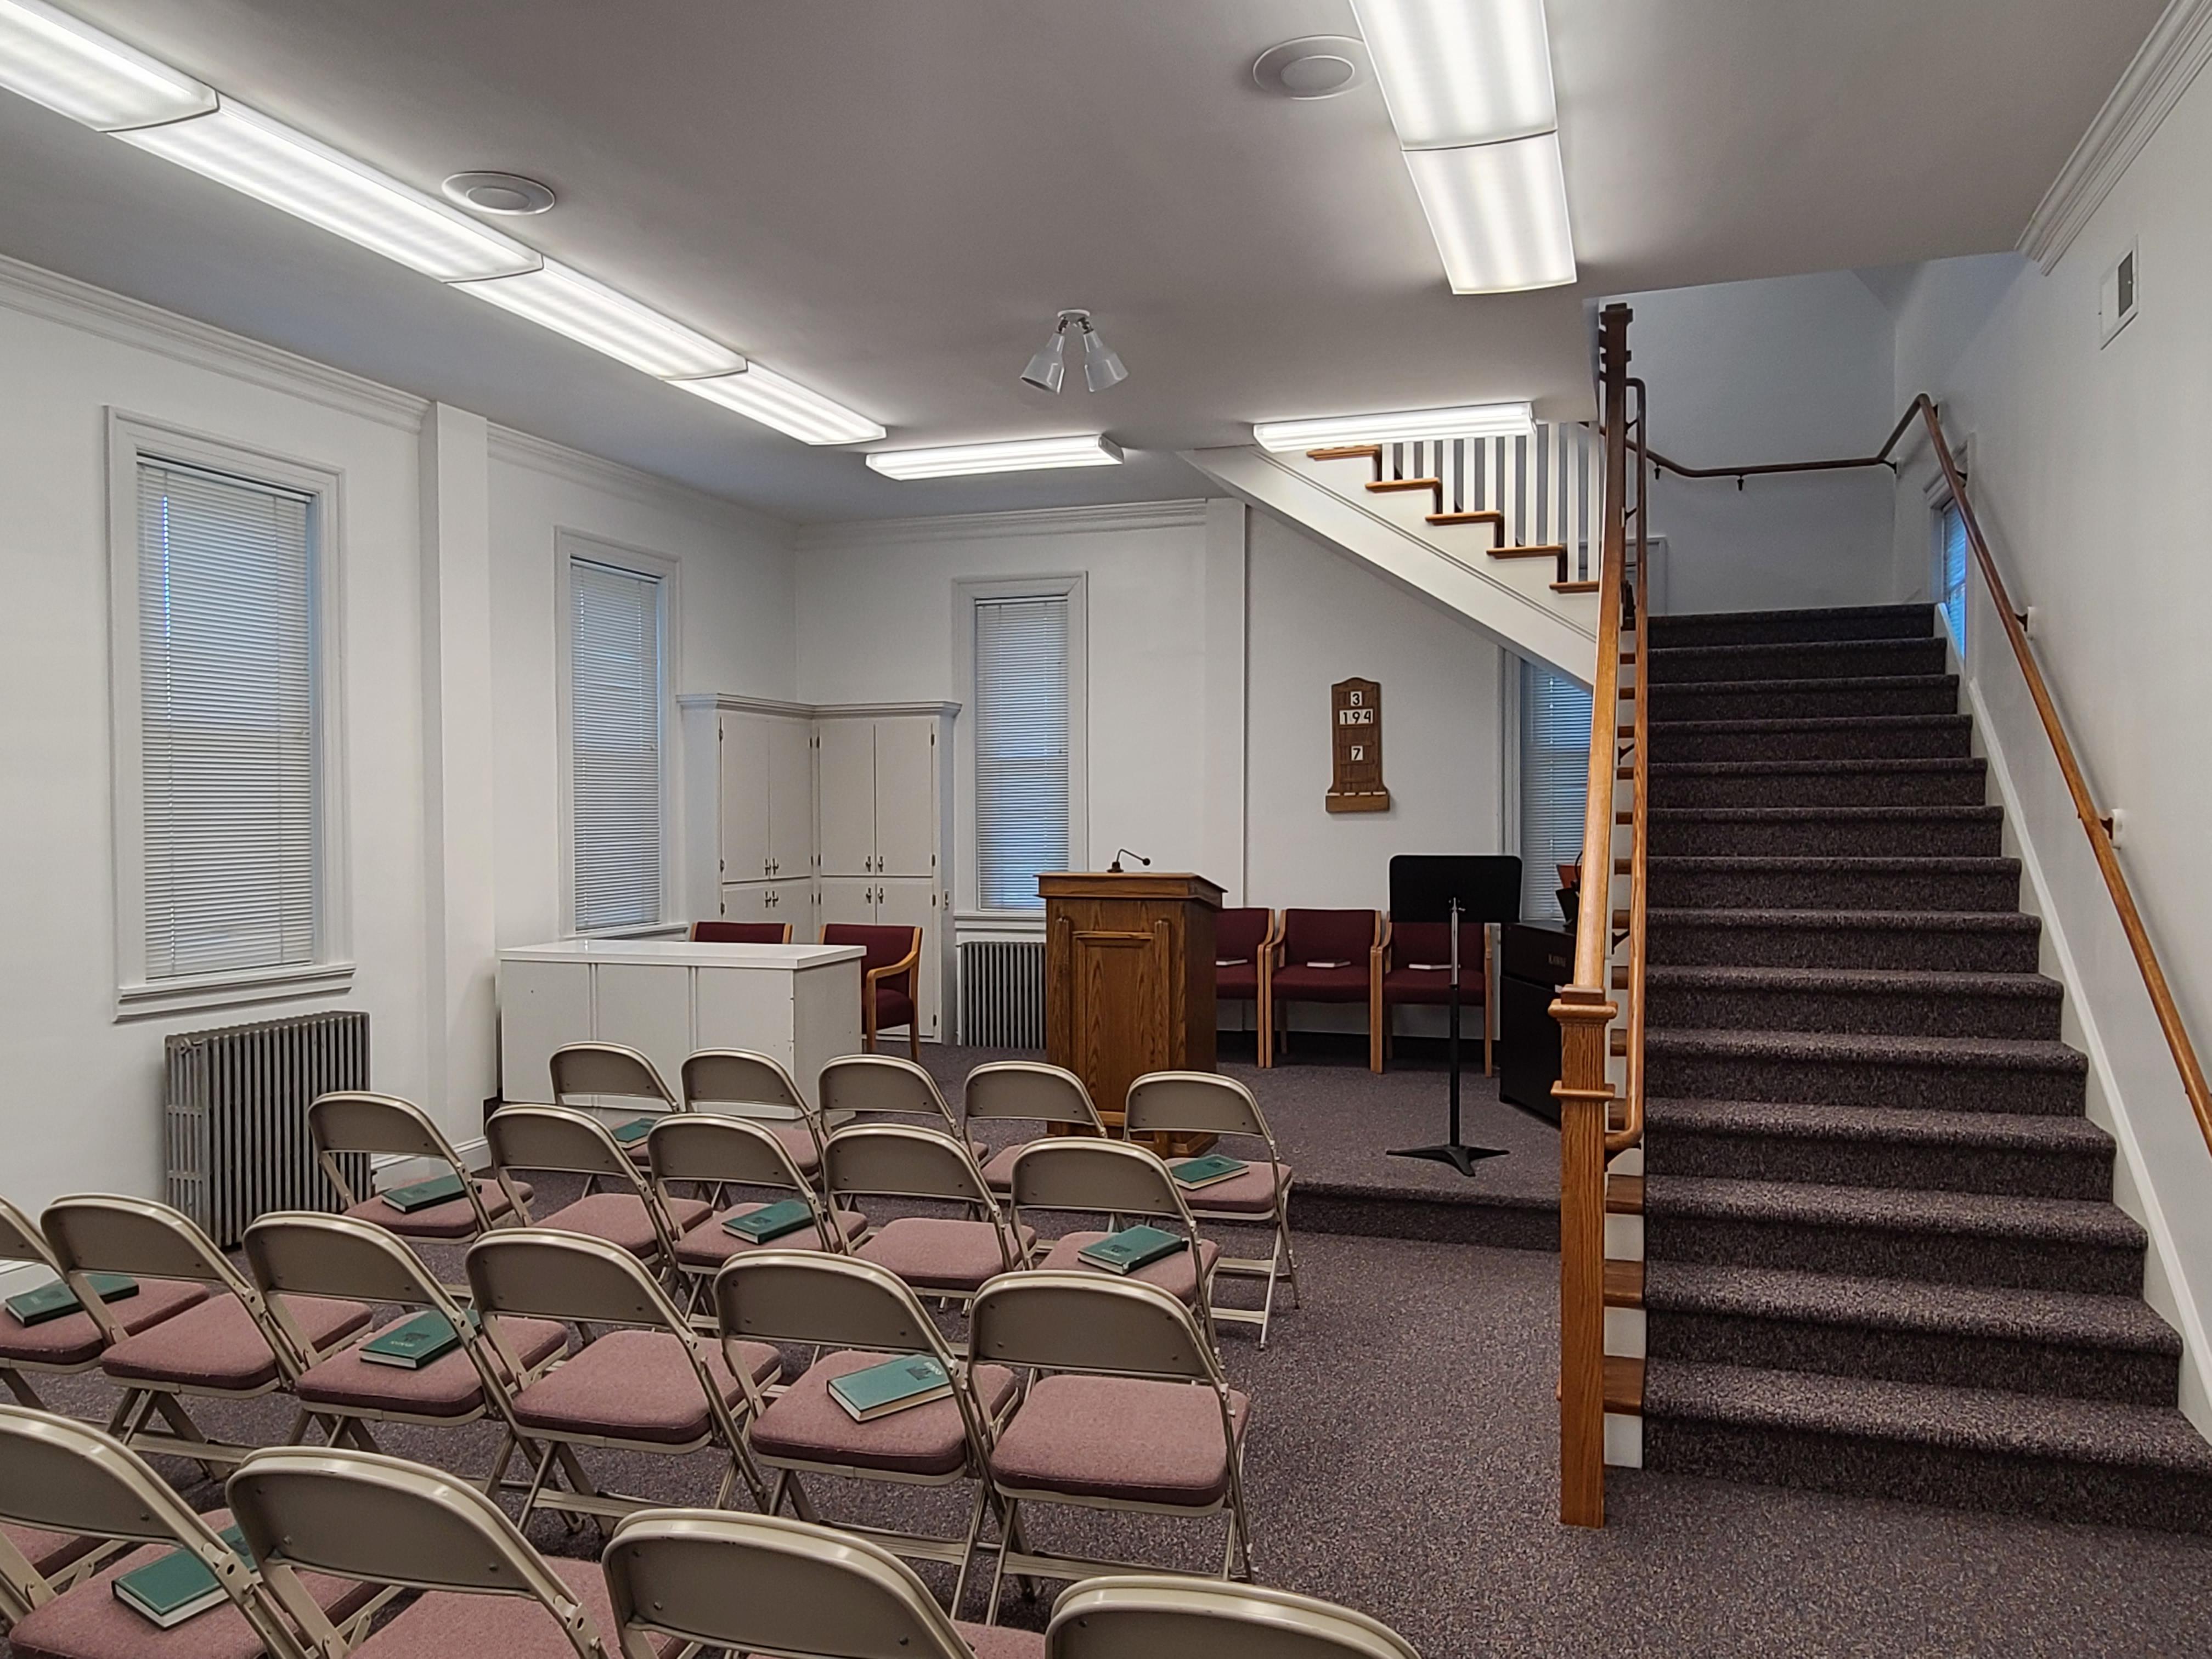 This room serves as the chapel for the Stuart, Virginia congregation.  The building formerly served as a United States Post Office in Patrick County.